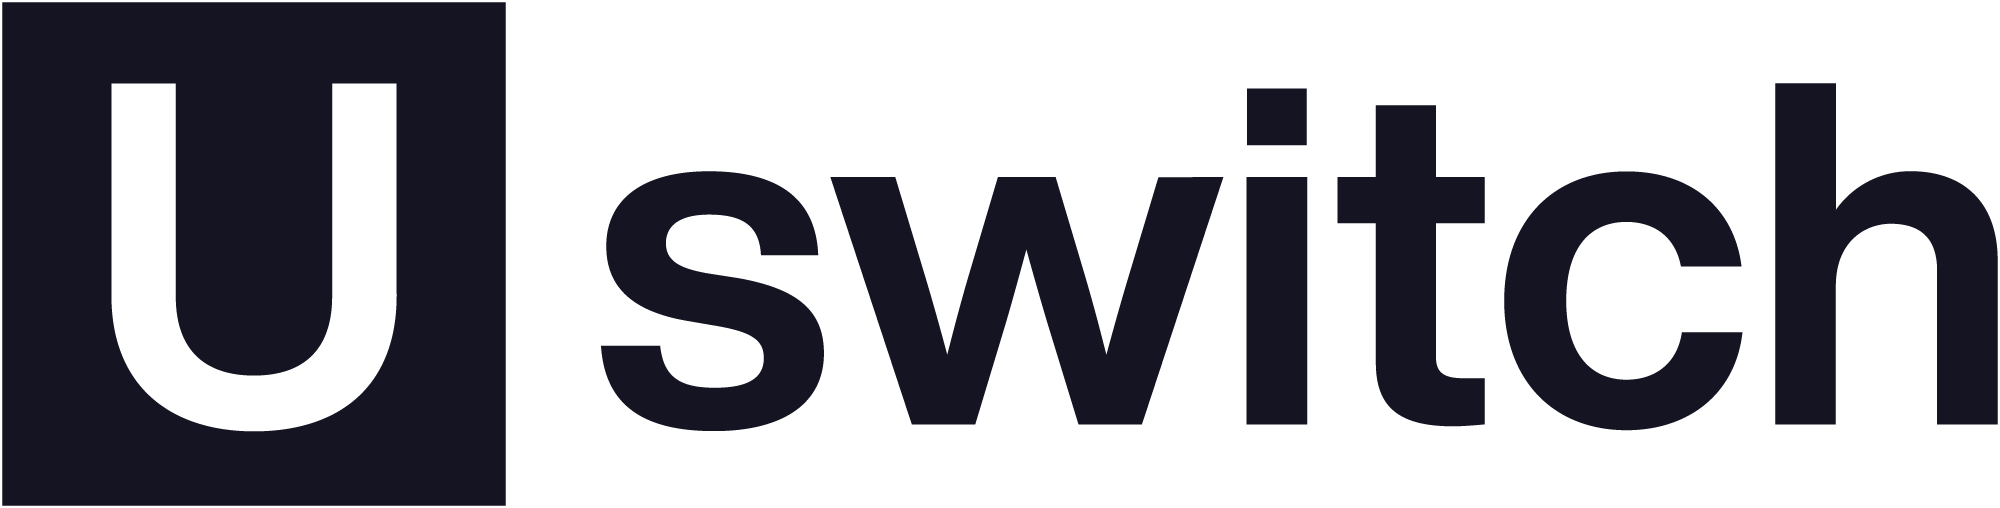 New Logo and Identity for Uswitch by venturethree